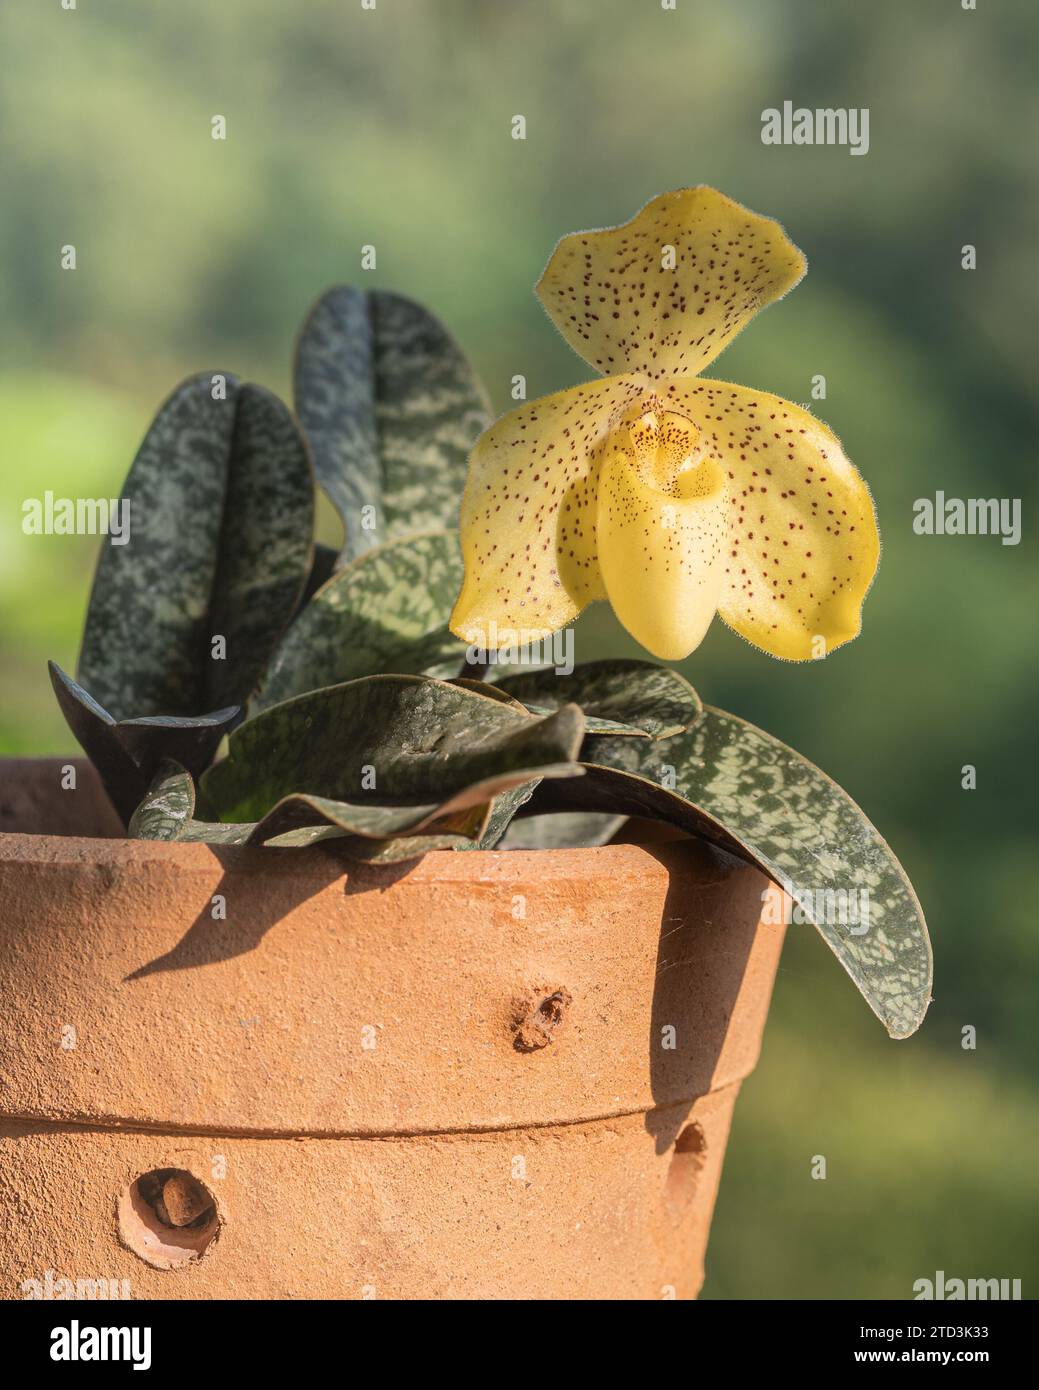 Closeup view of yellow with red dots flower of potted lady slipper orchid species paphiopedilum wenshanense aka conco-bellatulum isolated outdoors Stock Photo